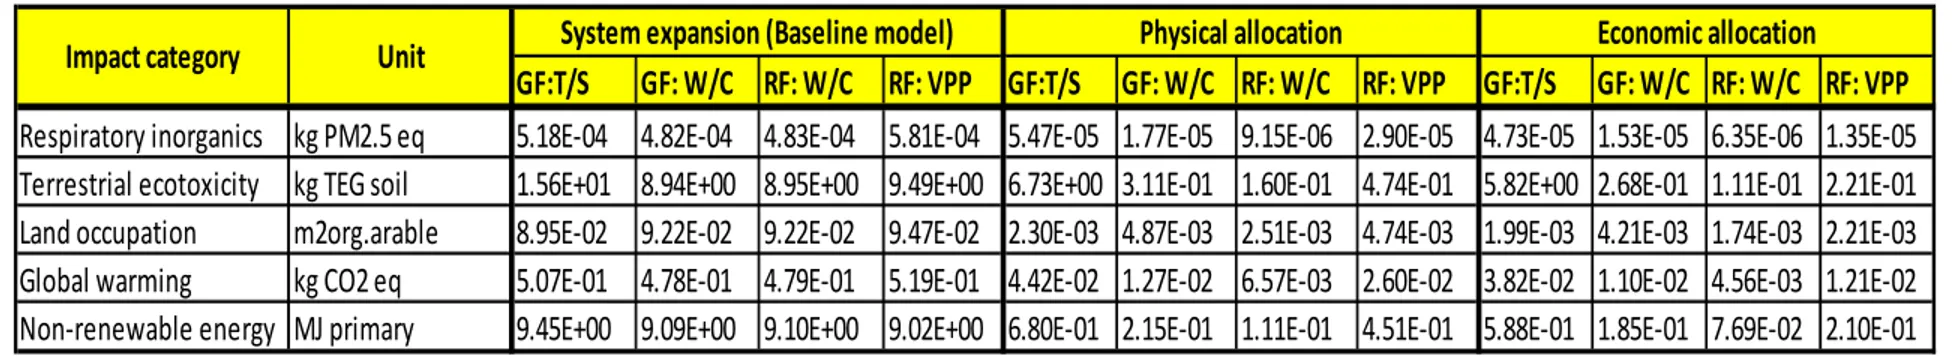 Table 5.10. Characterization results of allocation alternatives based on the selected LA-based metrics for different pathways 